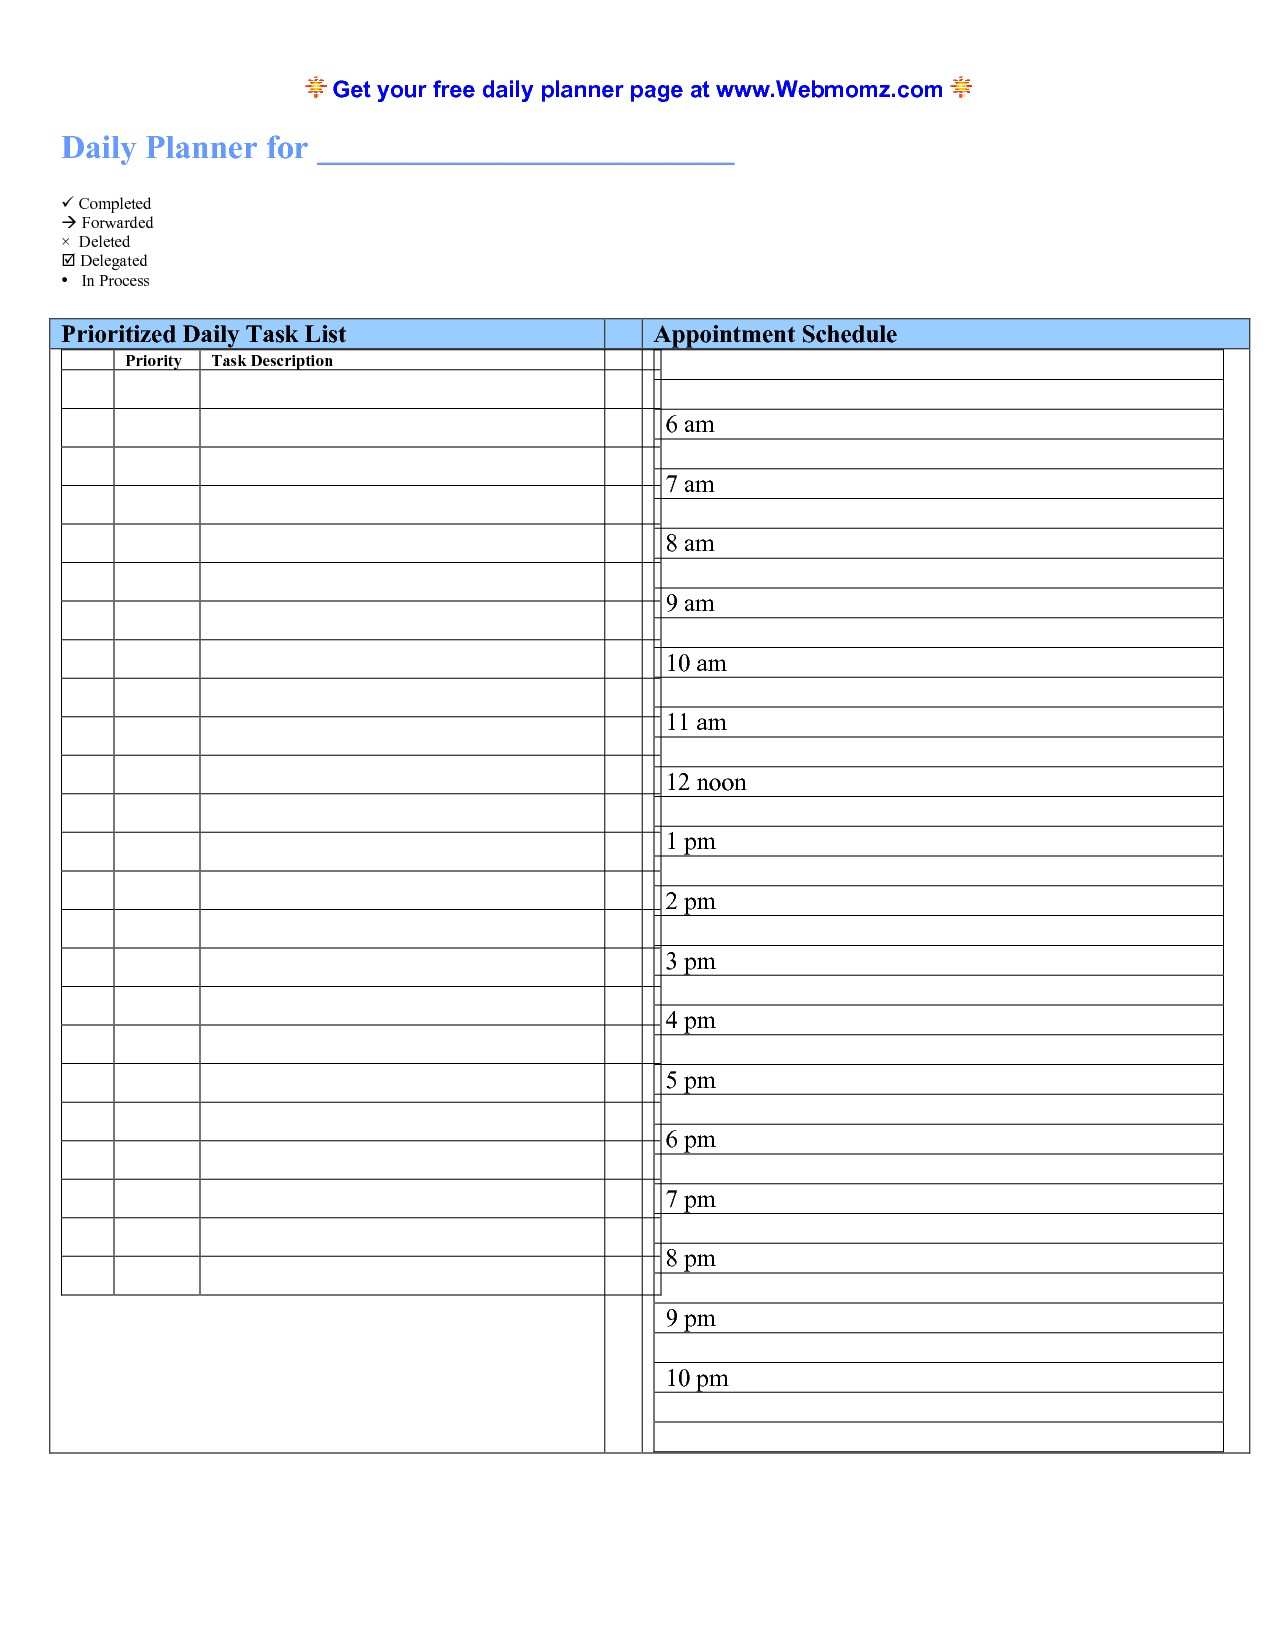 19 Daily Calendar Appointment Template Now by Daily Calendar Appointment Template